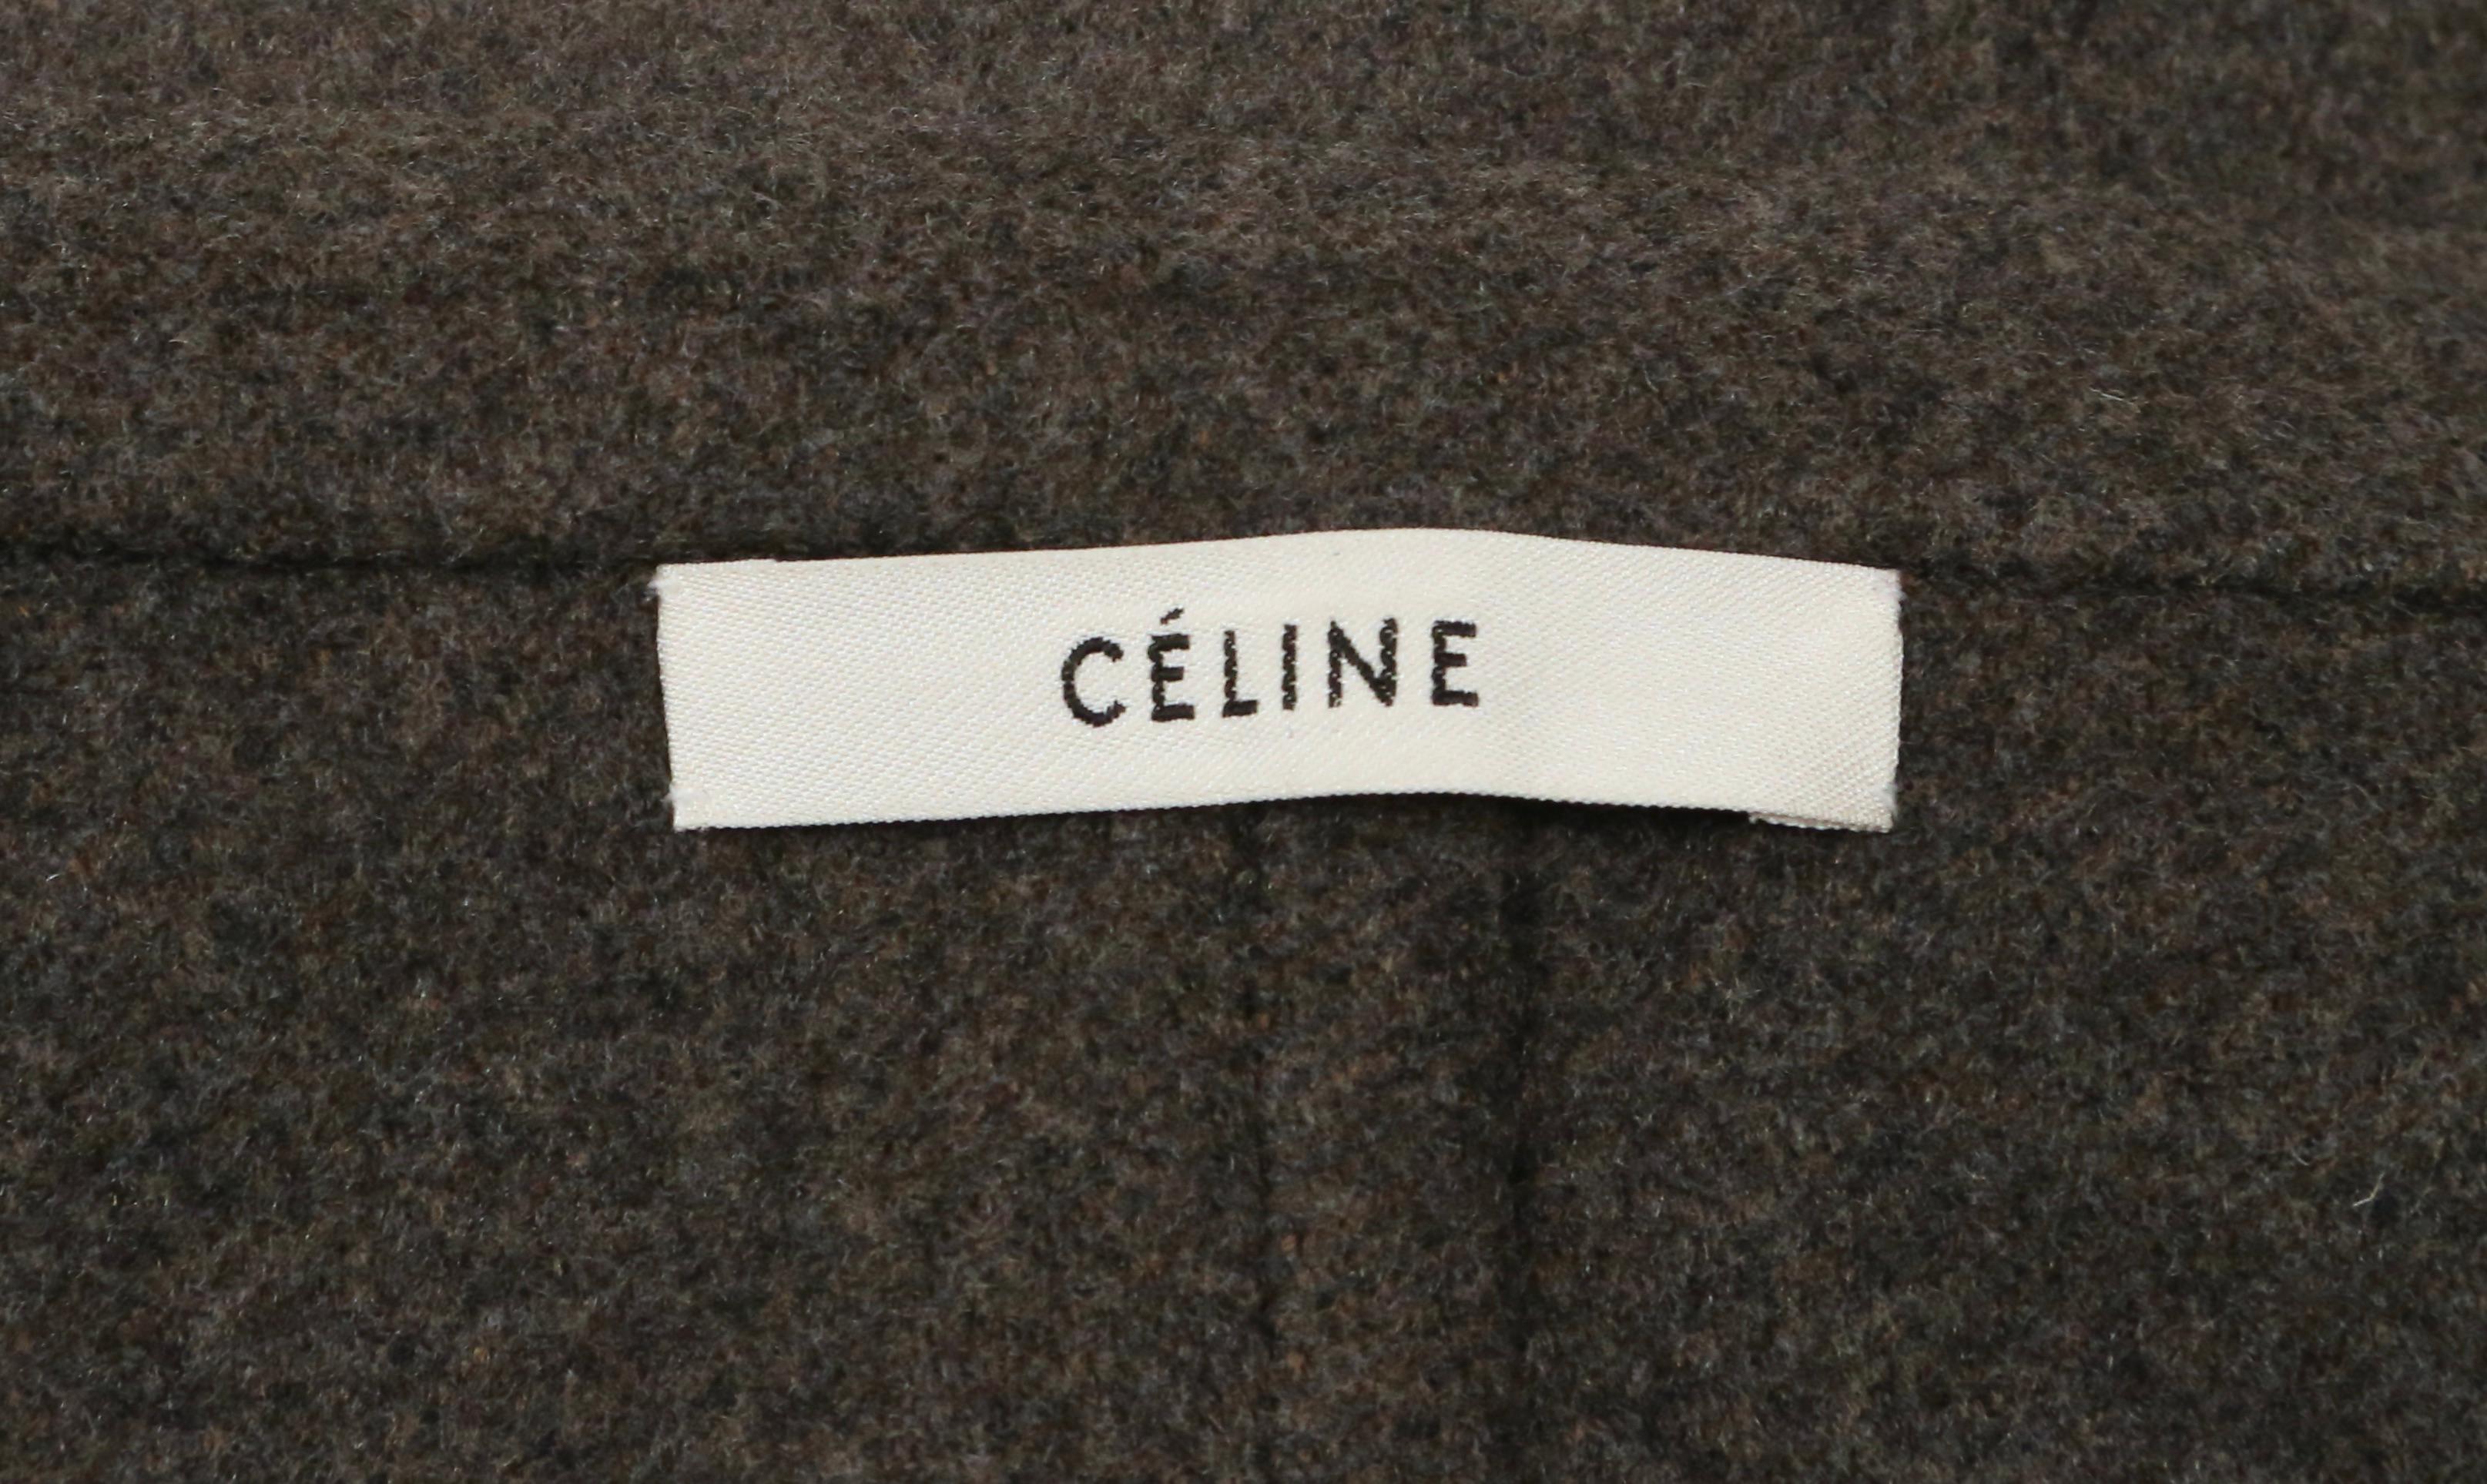 Celine by Phoebe Philo heathered grey cashmere coat with cutouts & wrap pockets For Sale 3